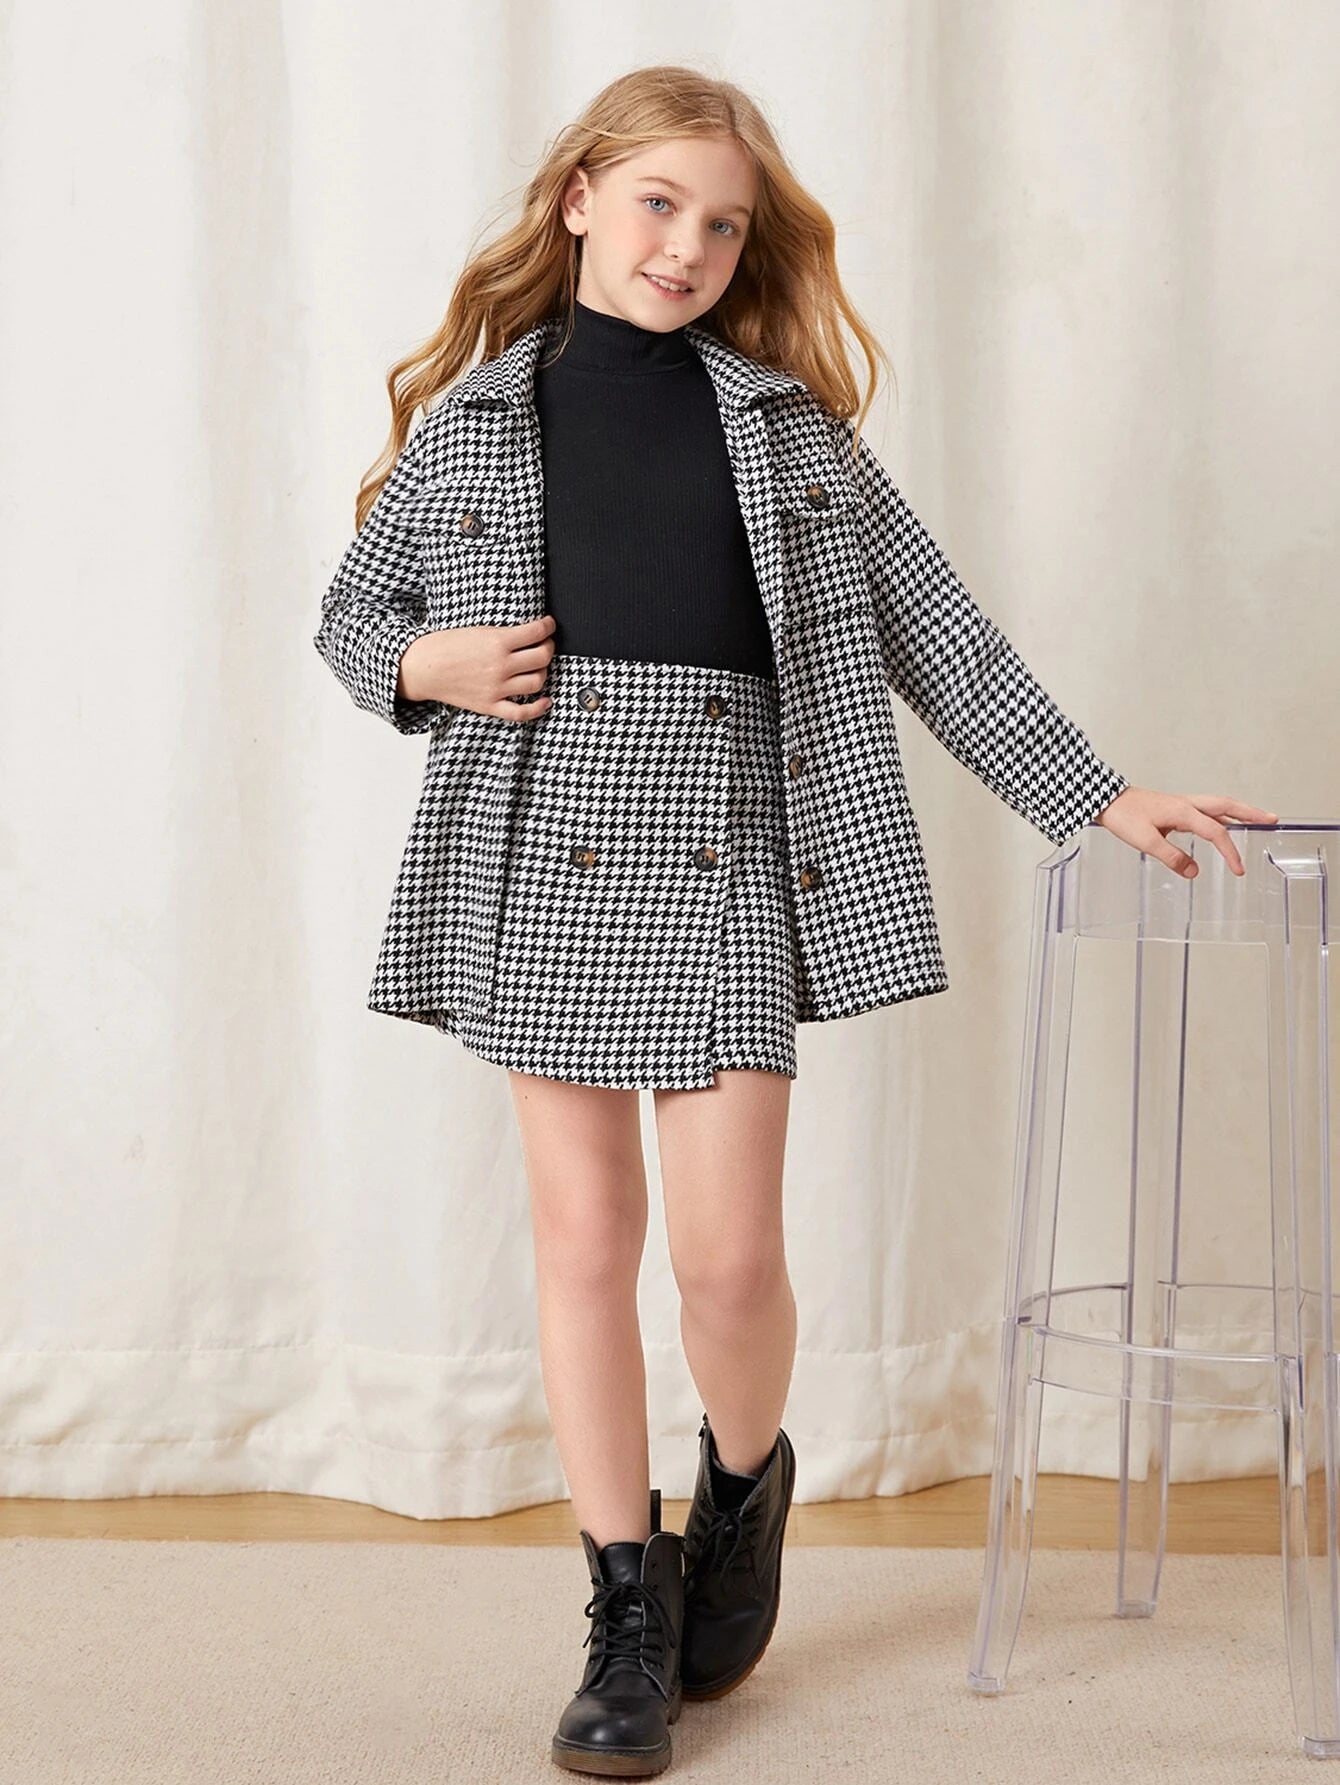 SHEIN Girls Houndstooth Flap Pocket Tweed Coat & Double Breasted Skirt